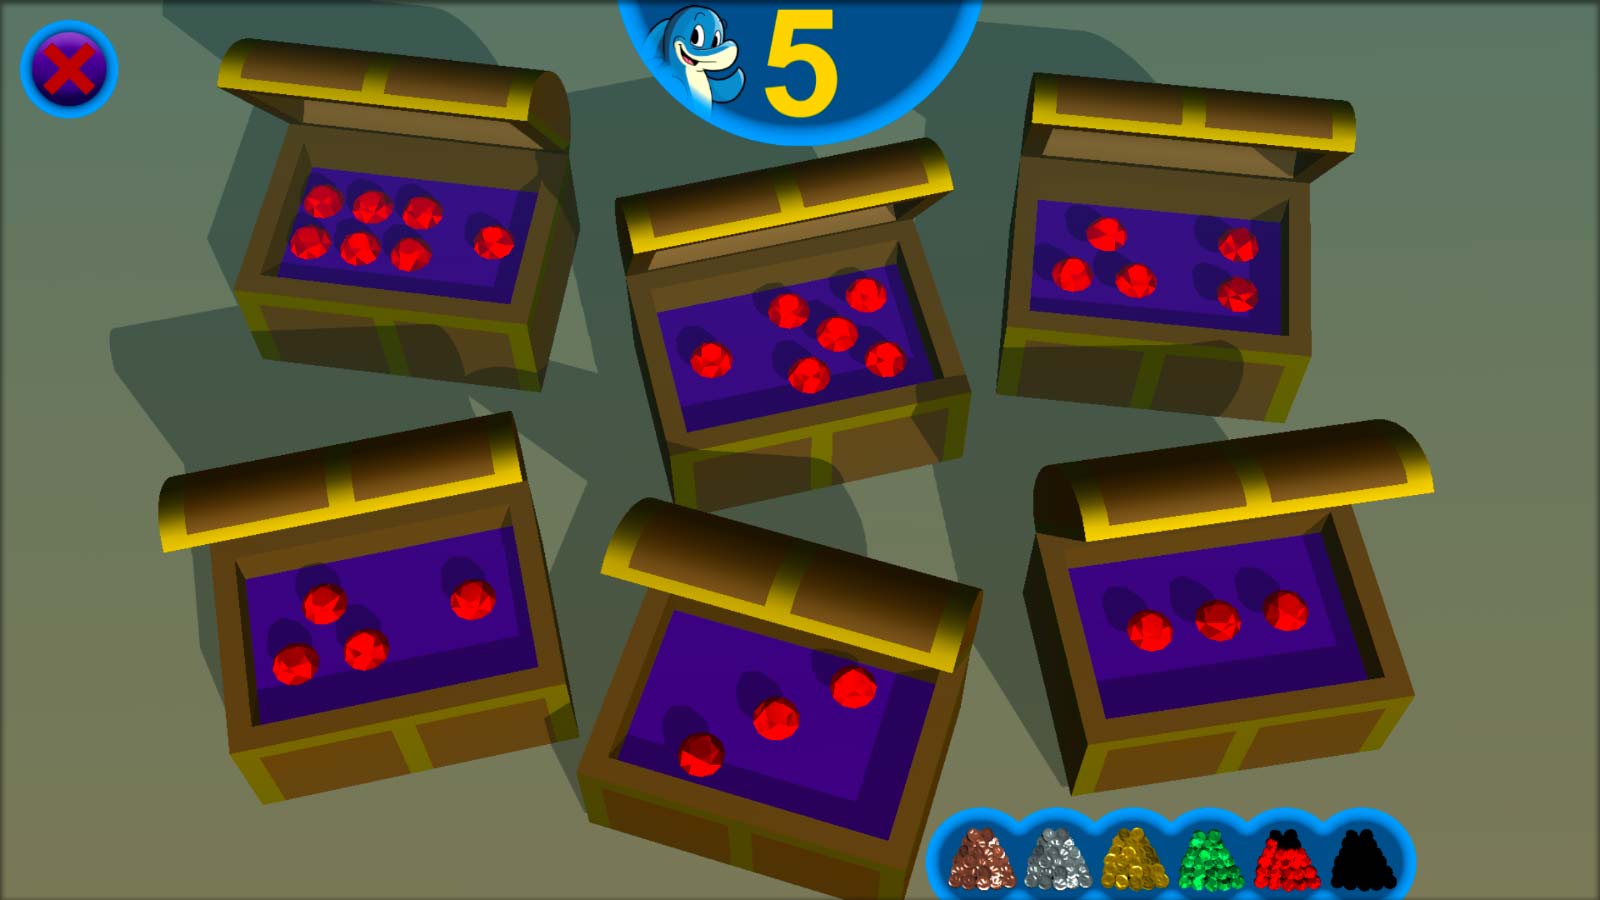 Educational mobile game to teach early math skills: treasure chests with countable patterns of gems